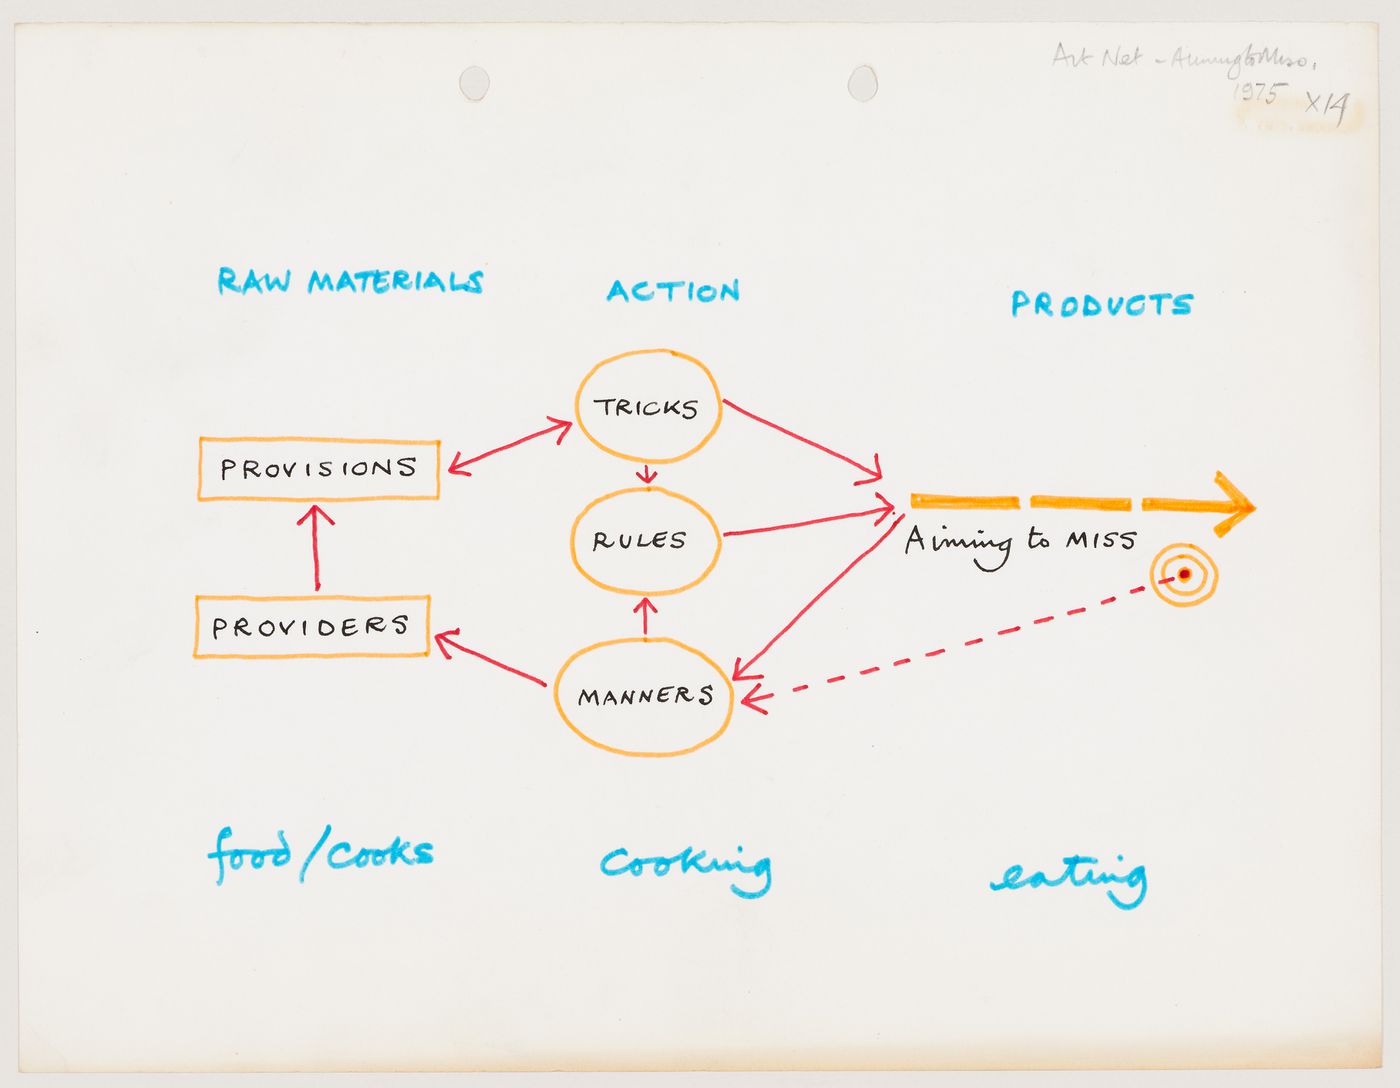 Diagram related to the lecture "Aiming to Miss" presented at Art Net, London, England, November 27, 1975